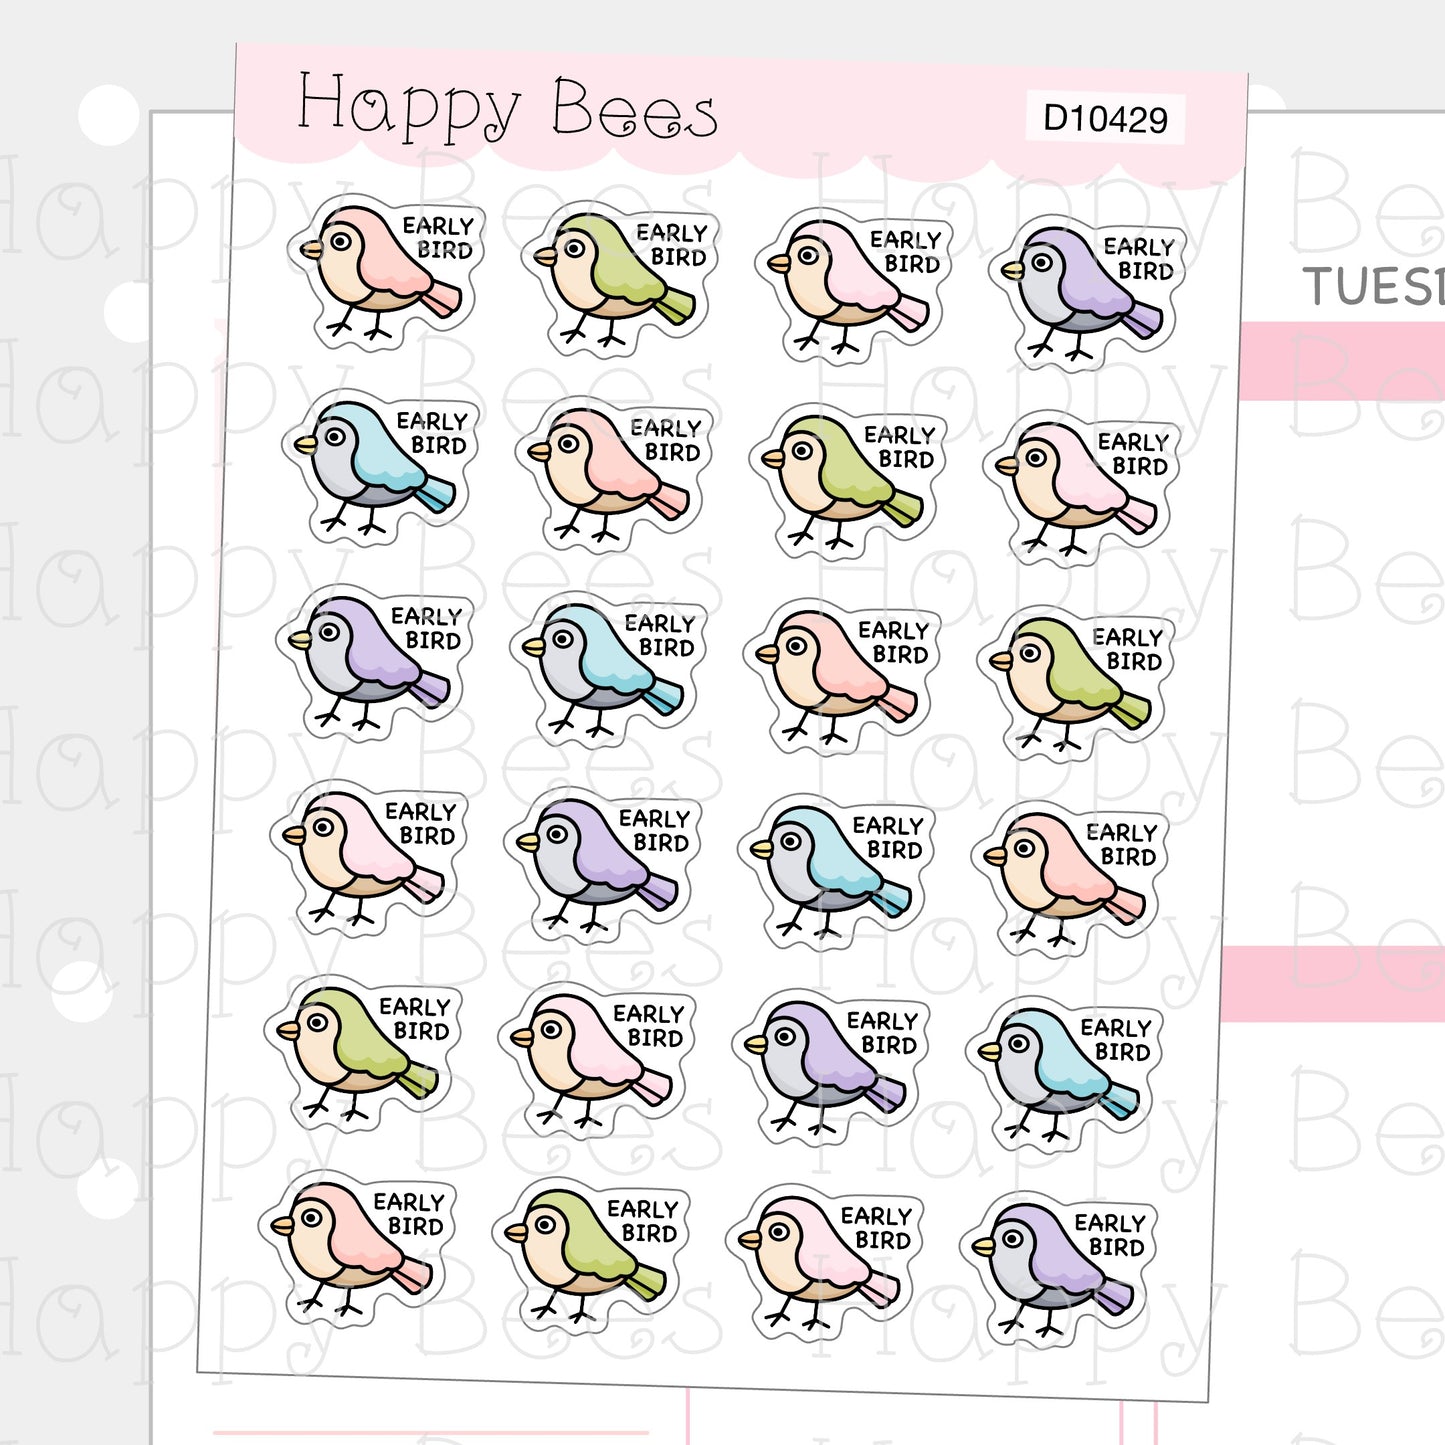 Early Bird Doodles - Cute Reminder Functional Planner Stickers D10429